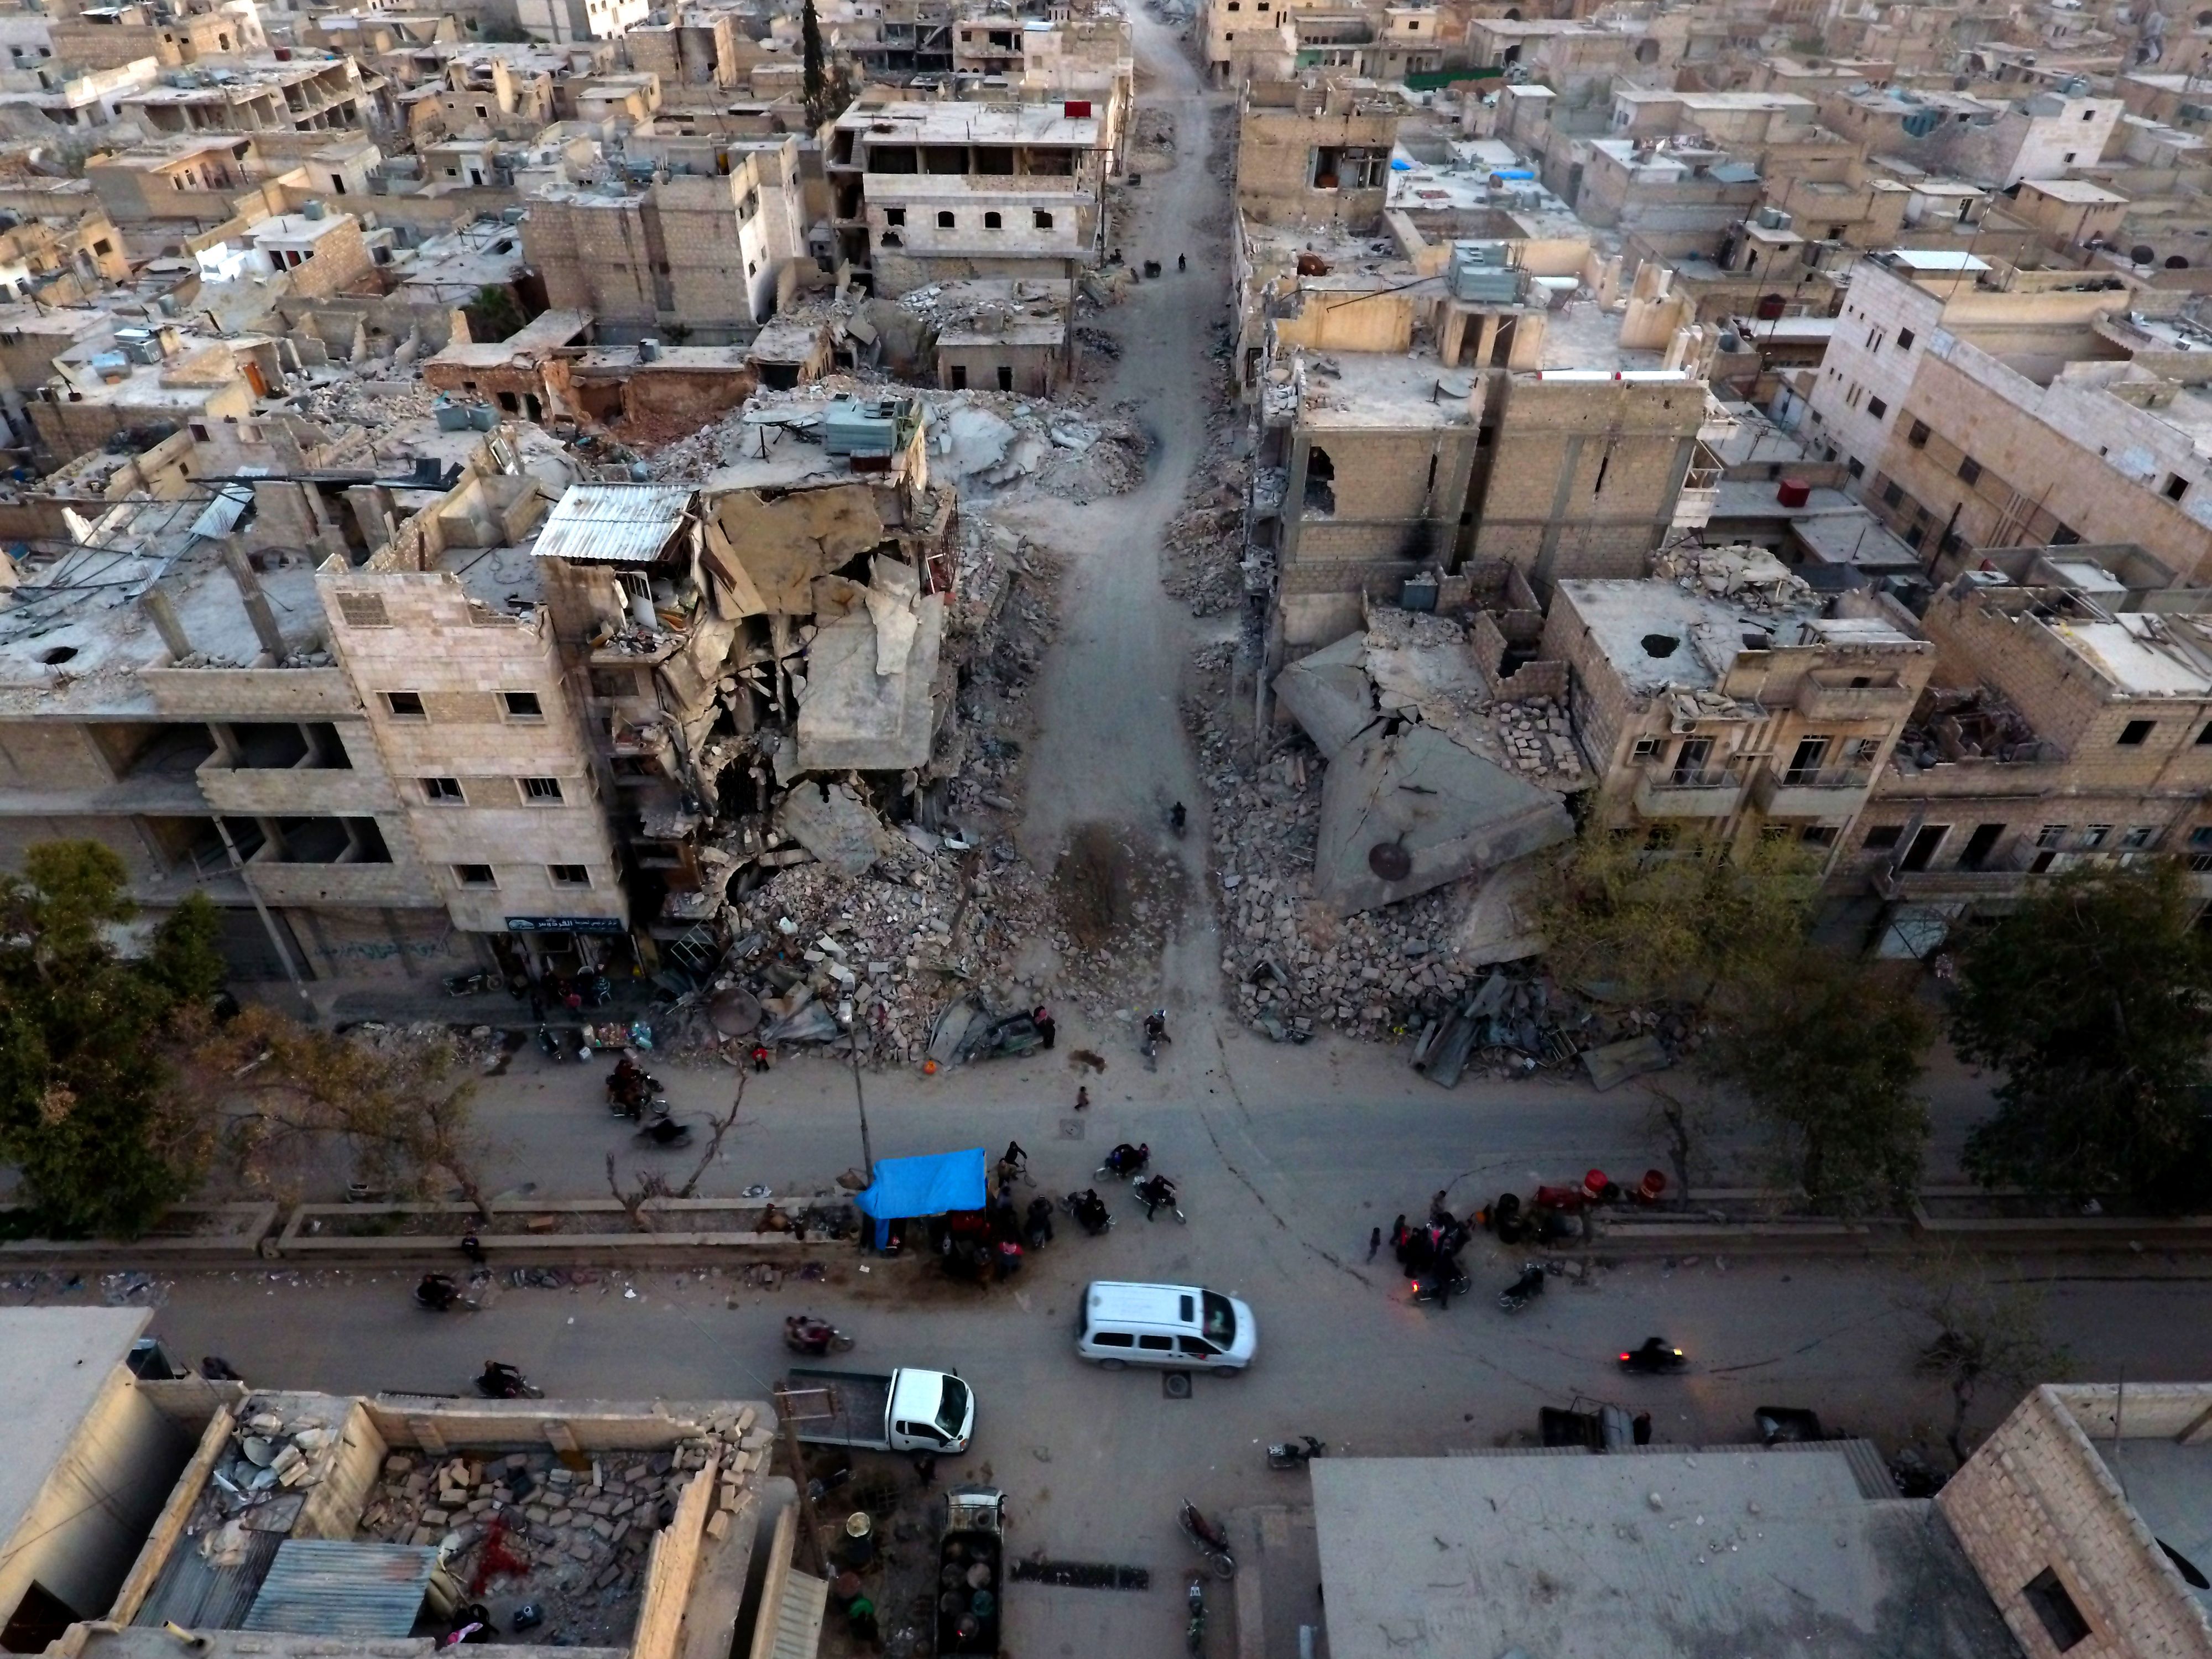 TOPSHOT - An aerial view shows destruction in al-Bab on March 29, 2017 a month after Turkish-backed rebels recaptured the northern Syrian town from Islamic State (IS) group fighters. Turkey on March 29, 2017 announced its military campaign inside northern Syria was over, without specifying whether it will pull its troops out from the neighbouring country / AFP PHOTO / Zein Al RIFAI / TT / kod 444